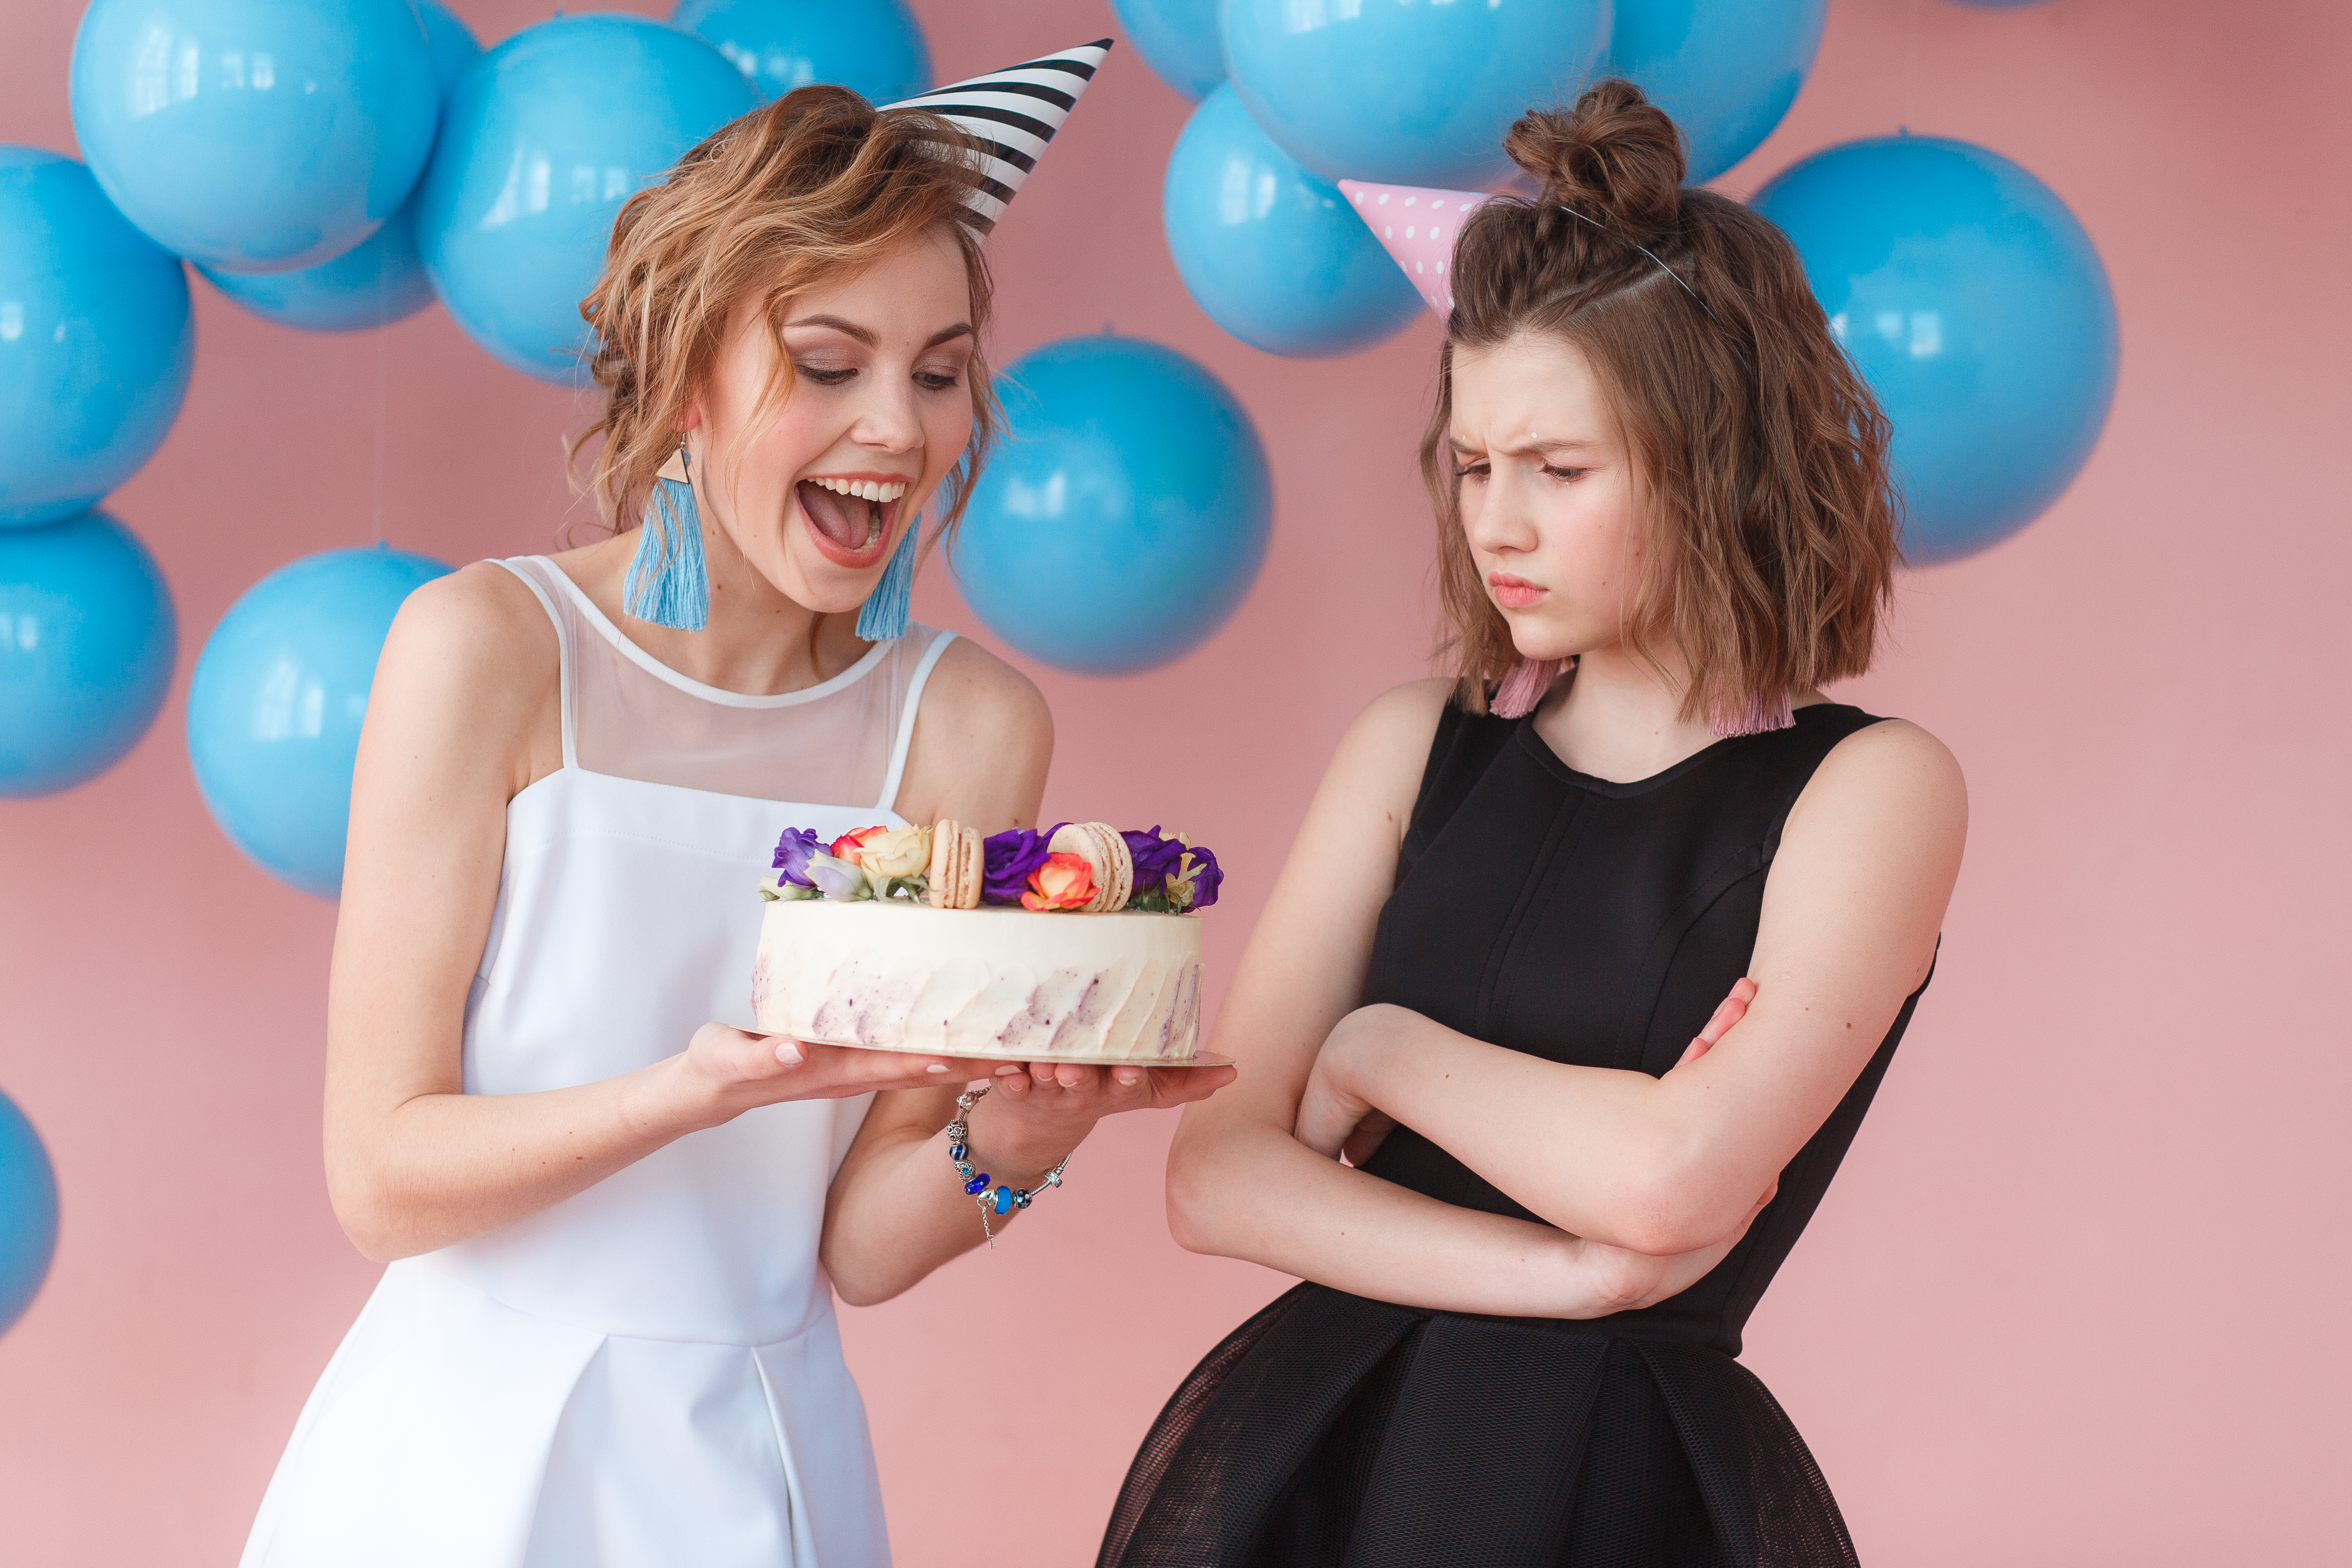 Two teenagers holding a birthday cake, one smiling and the other frowning | Source: freepic.diller on Freepik